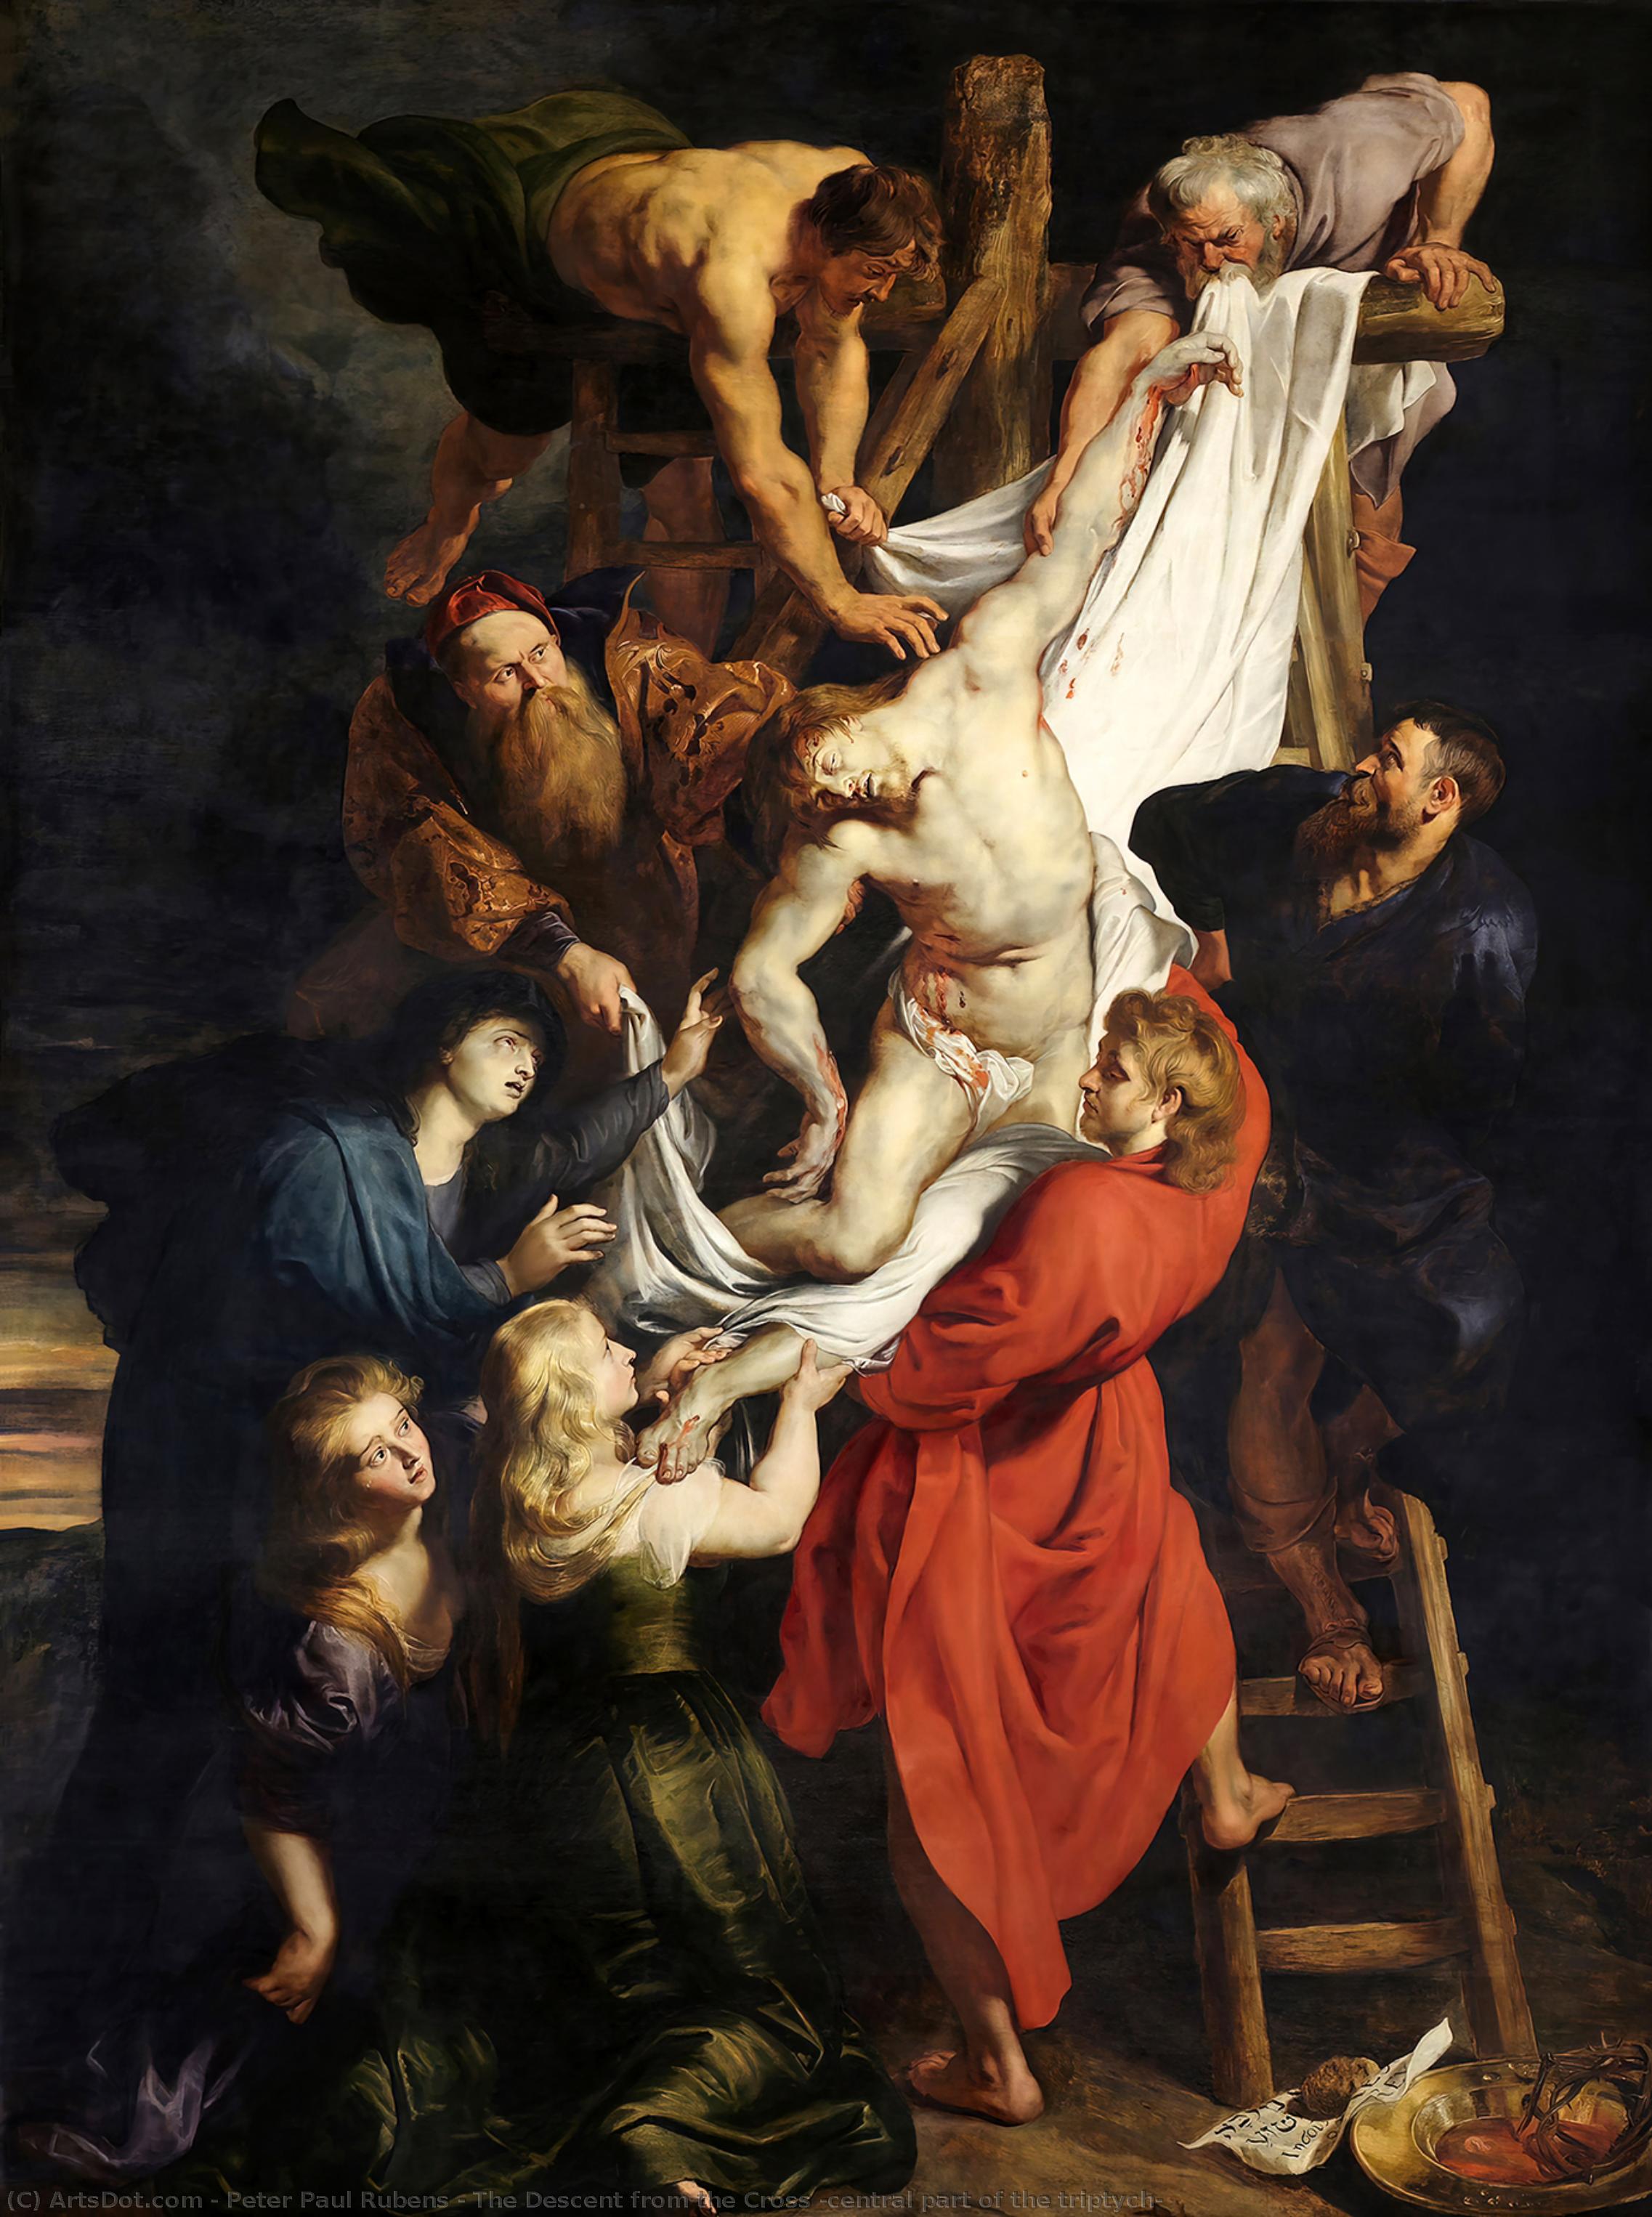 WikiOO.org - 백과 사전 - 회화, 삽화 Peter Paul Rubens - The Descent from the Cross (central part of the triptych)